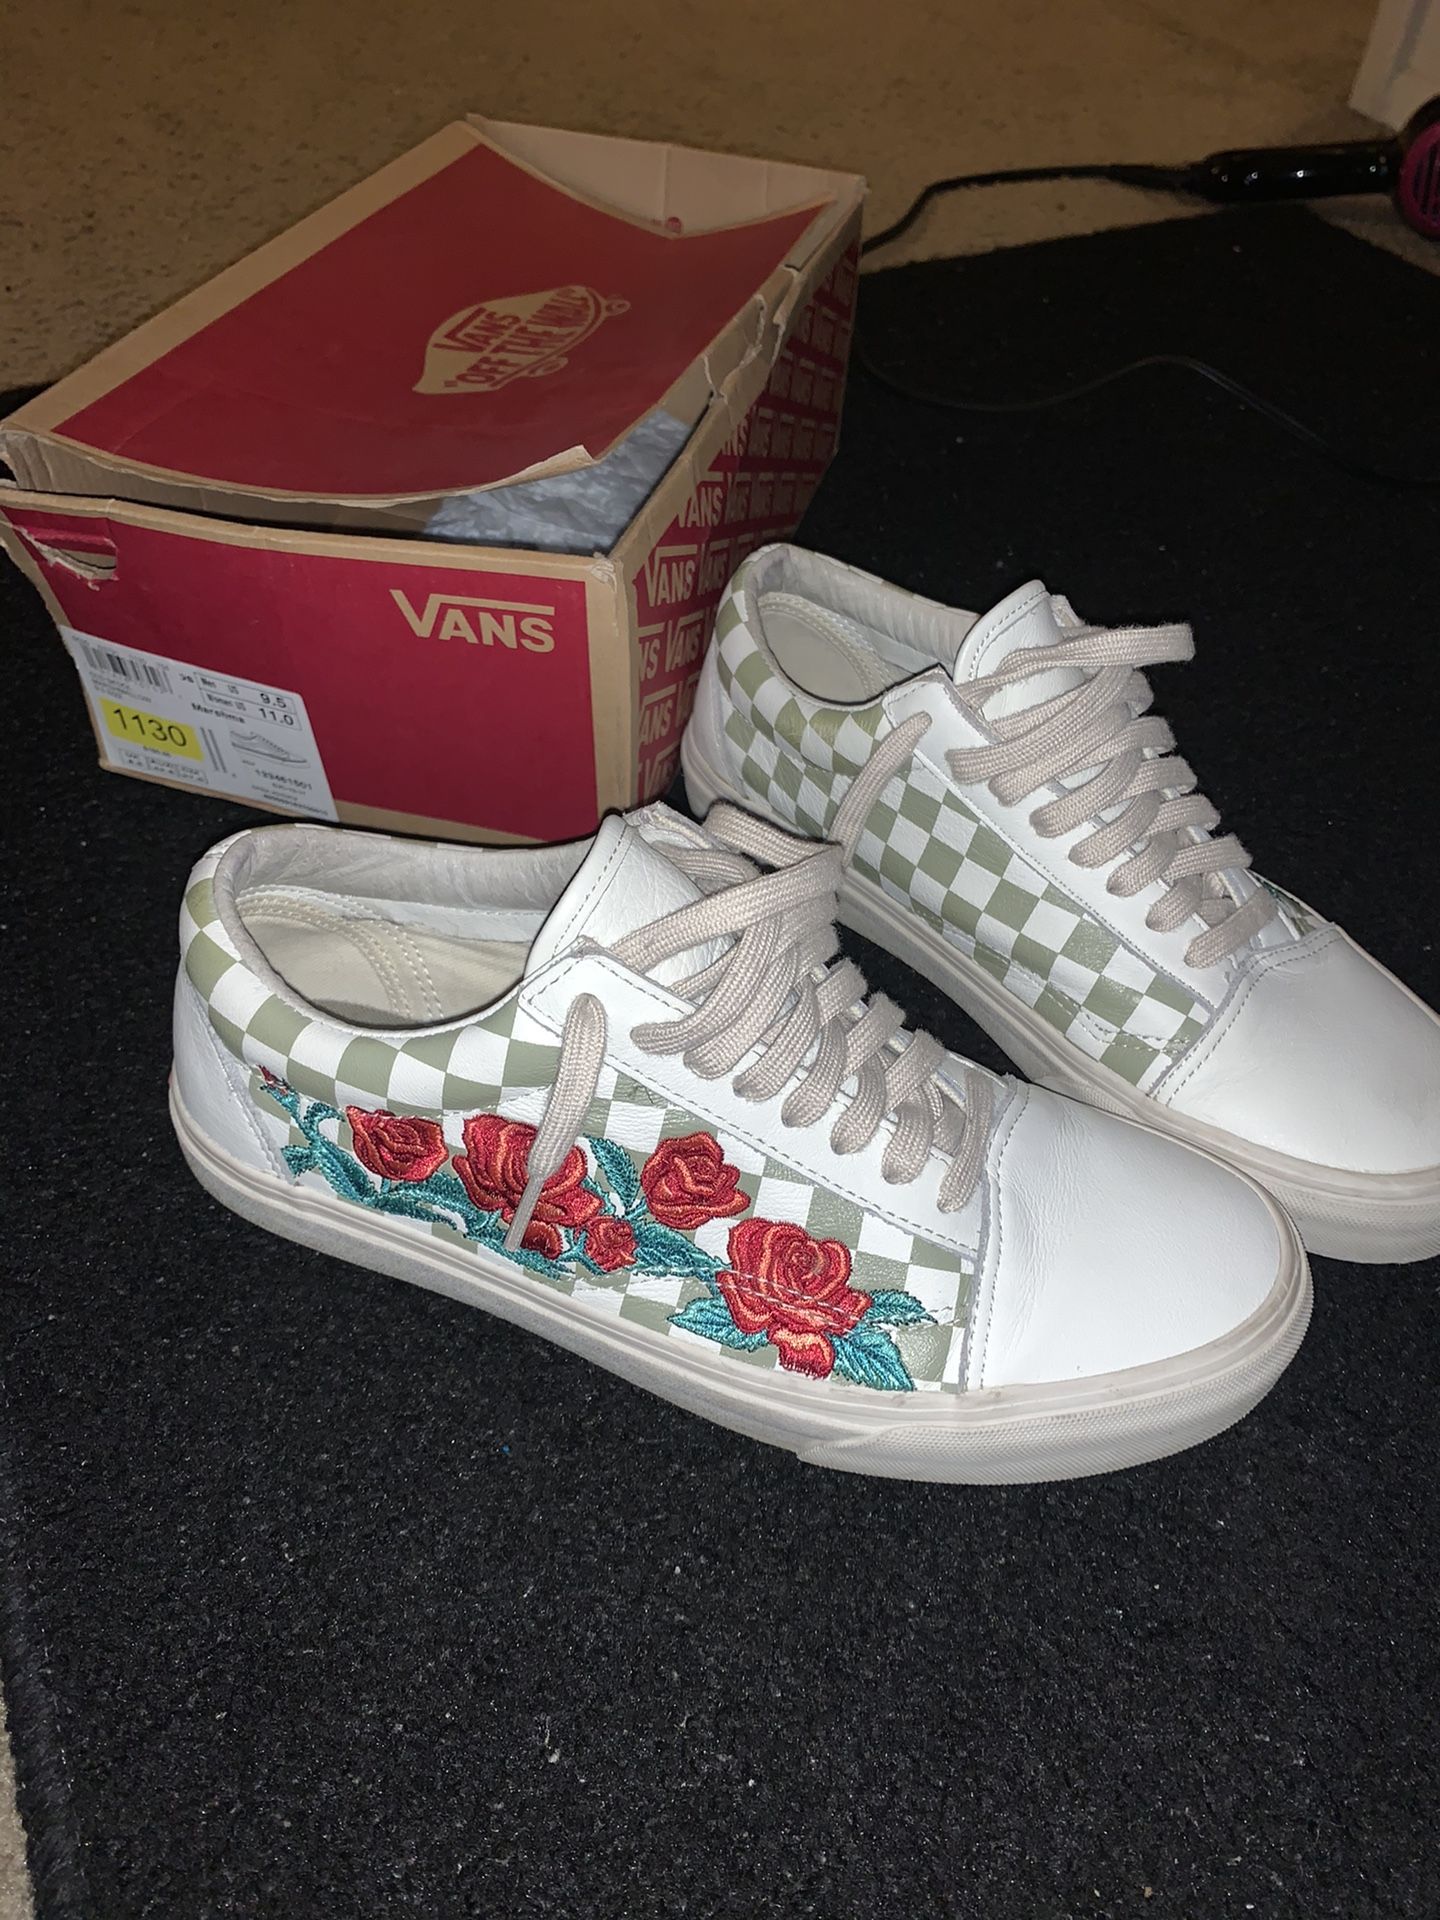 Vans “Rose Embroidery”